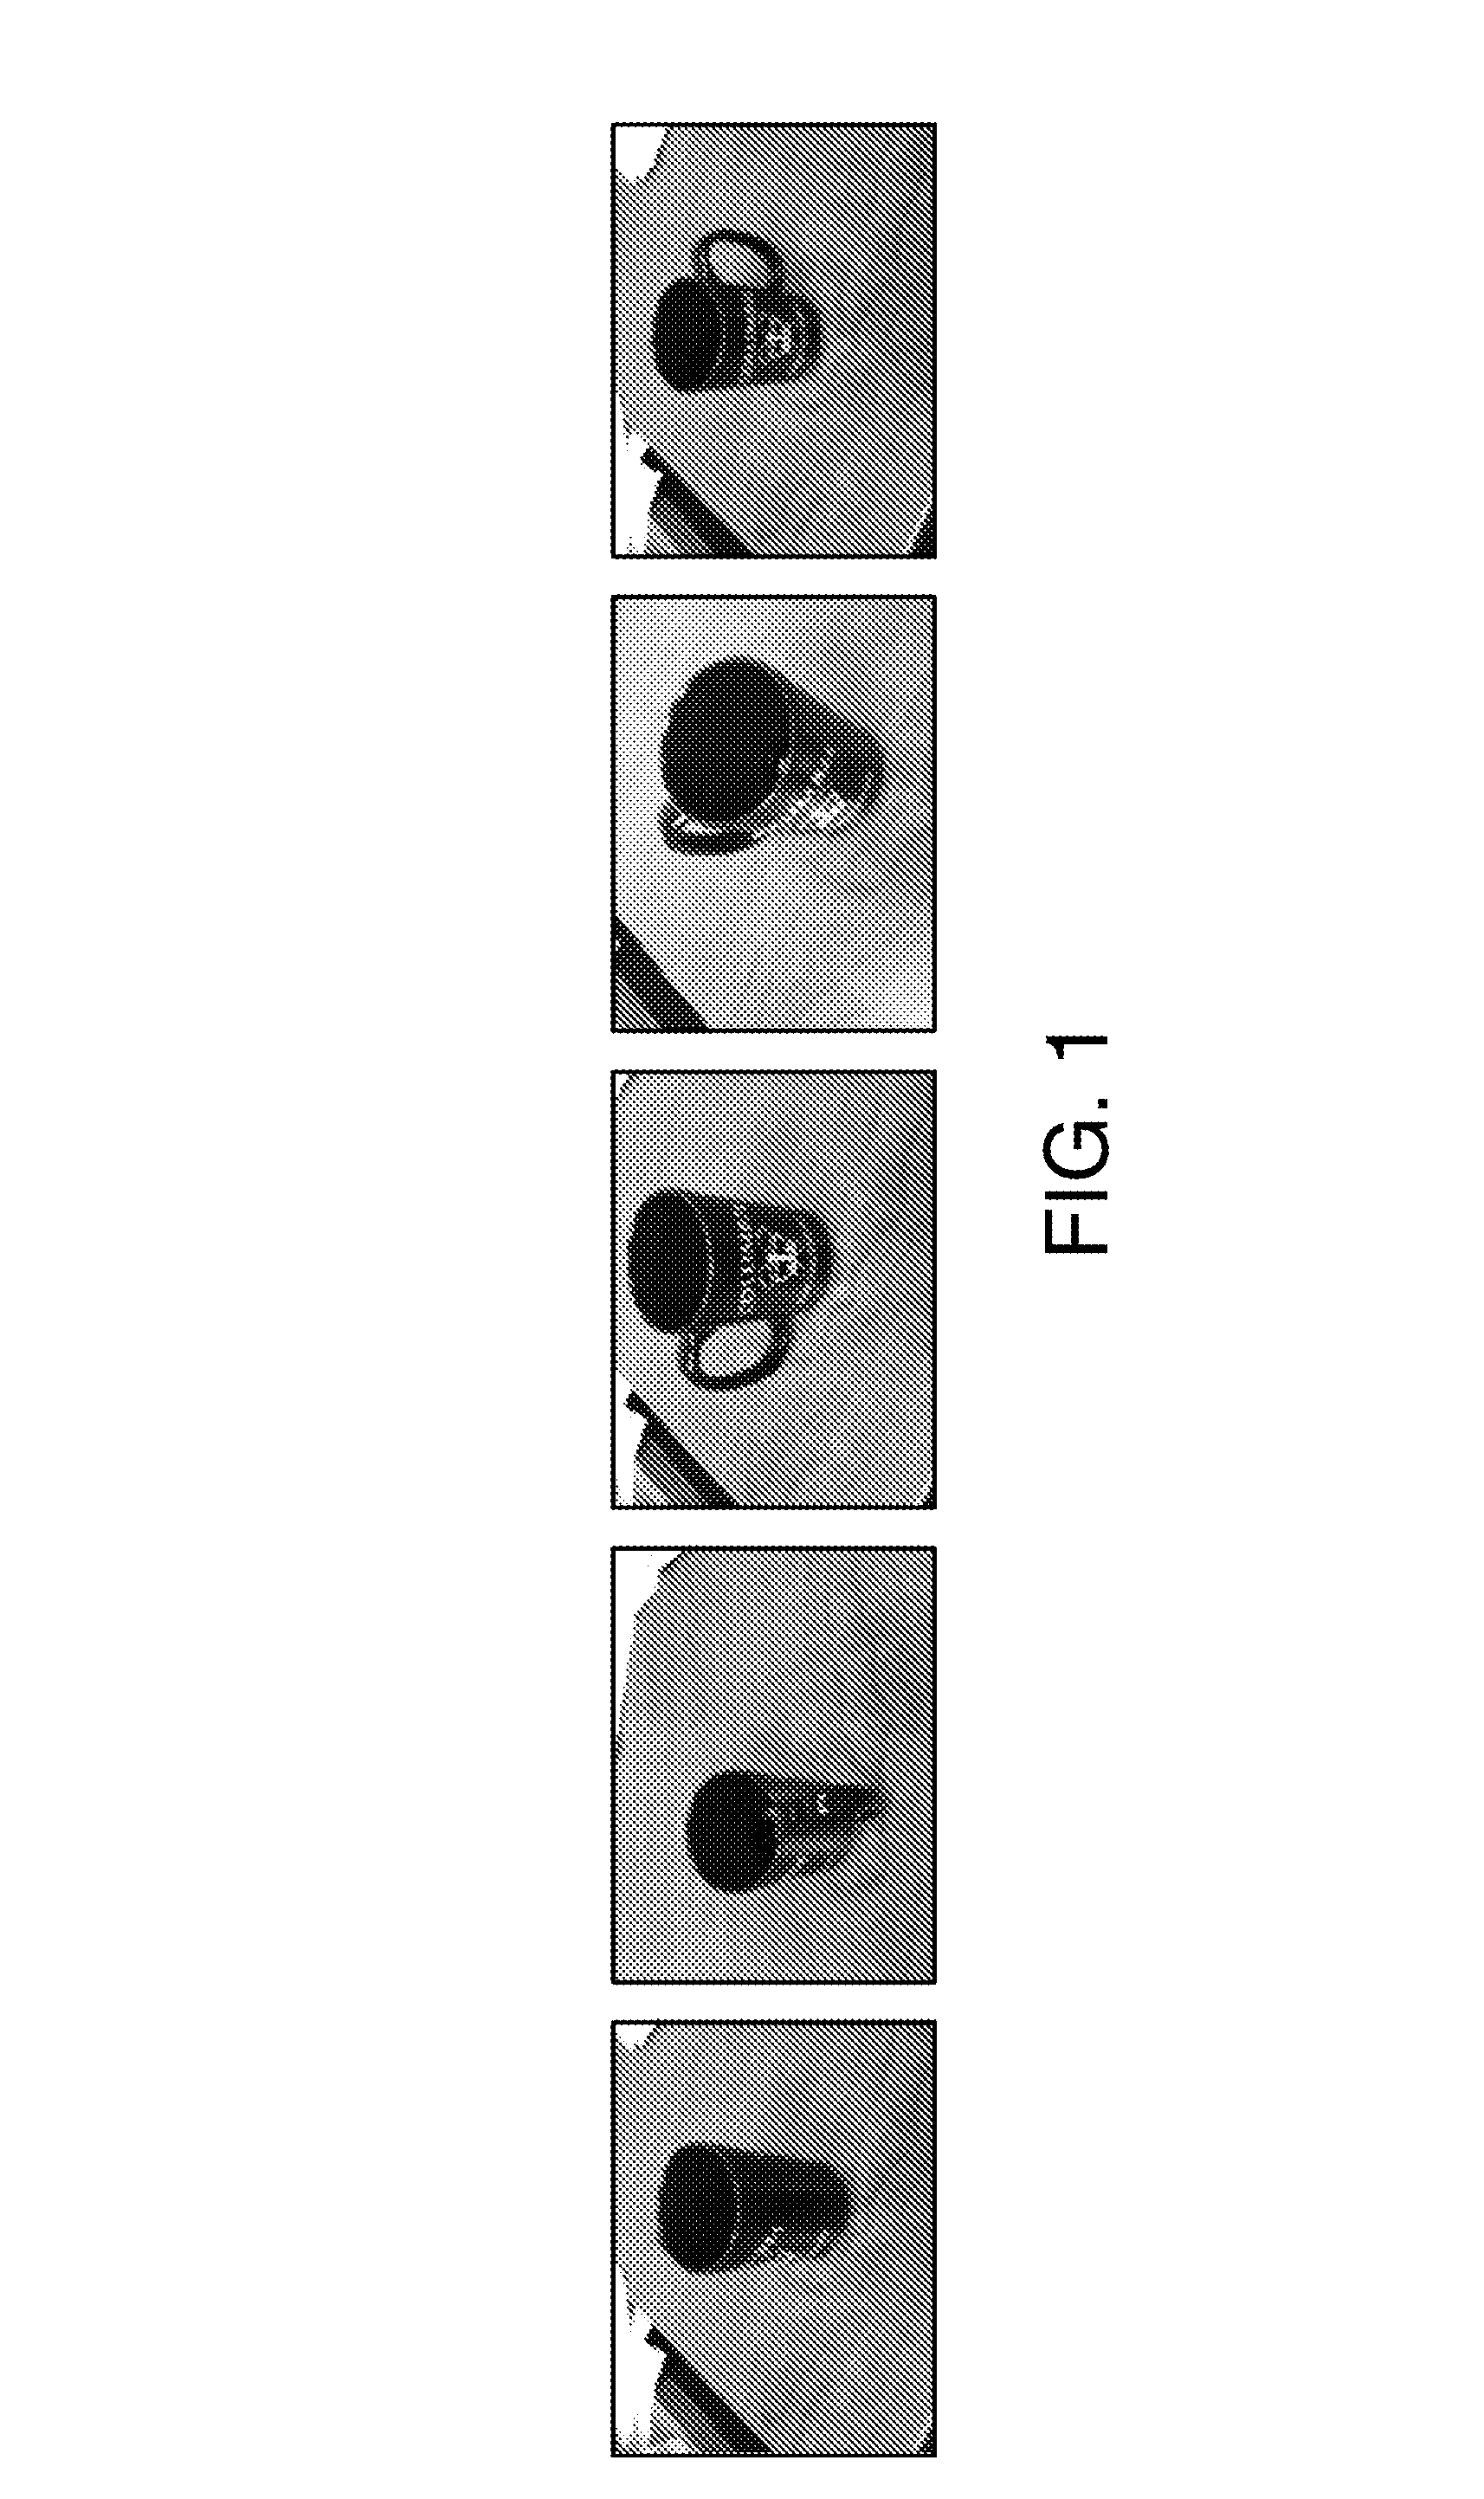 Systems and methods for automatically determining an improved view for a visual query in a mobile search